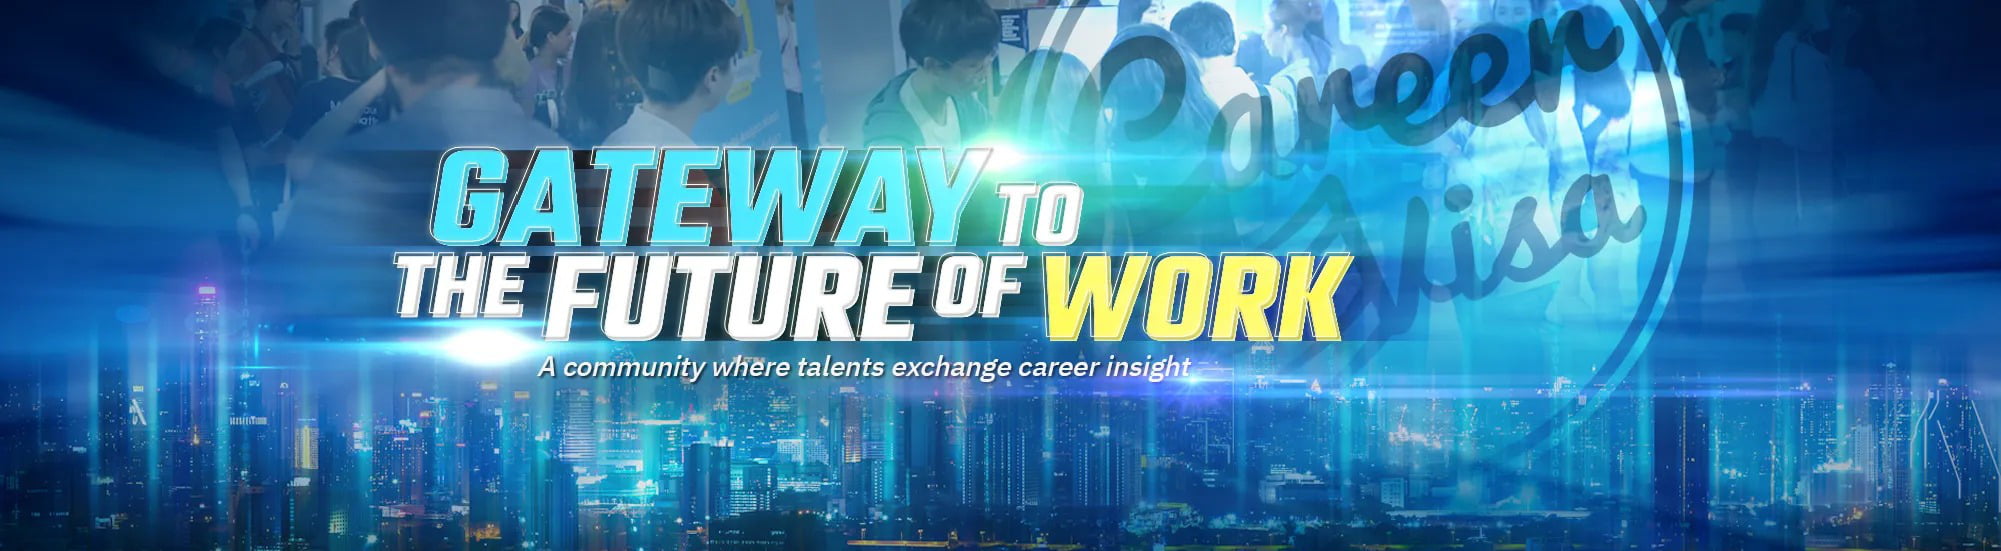 Gateway to the future of work - Career Visa Banner